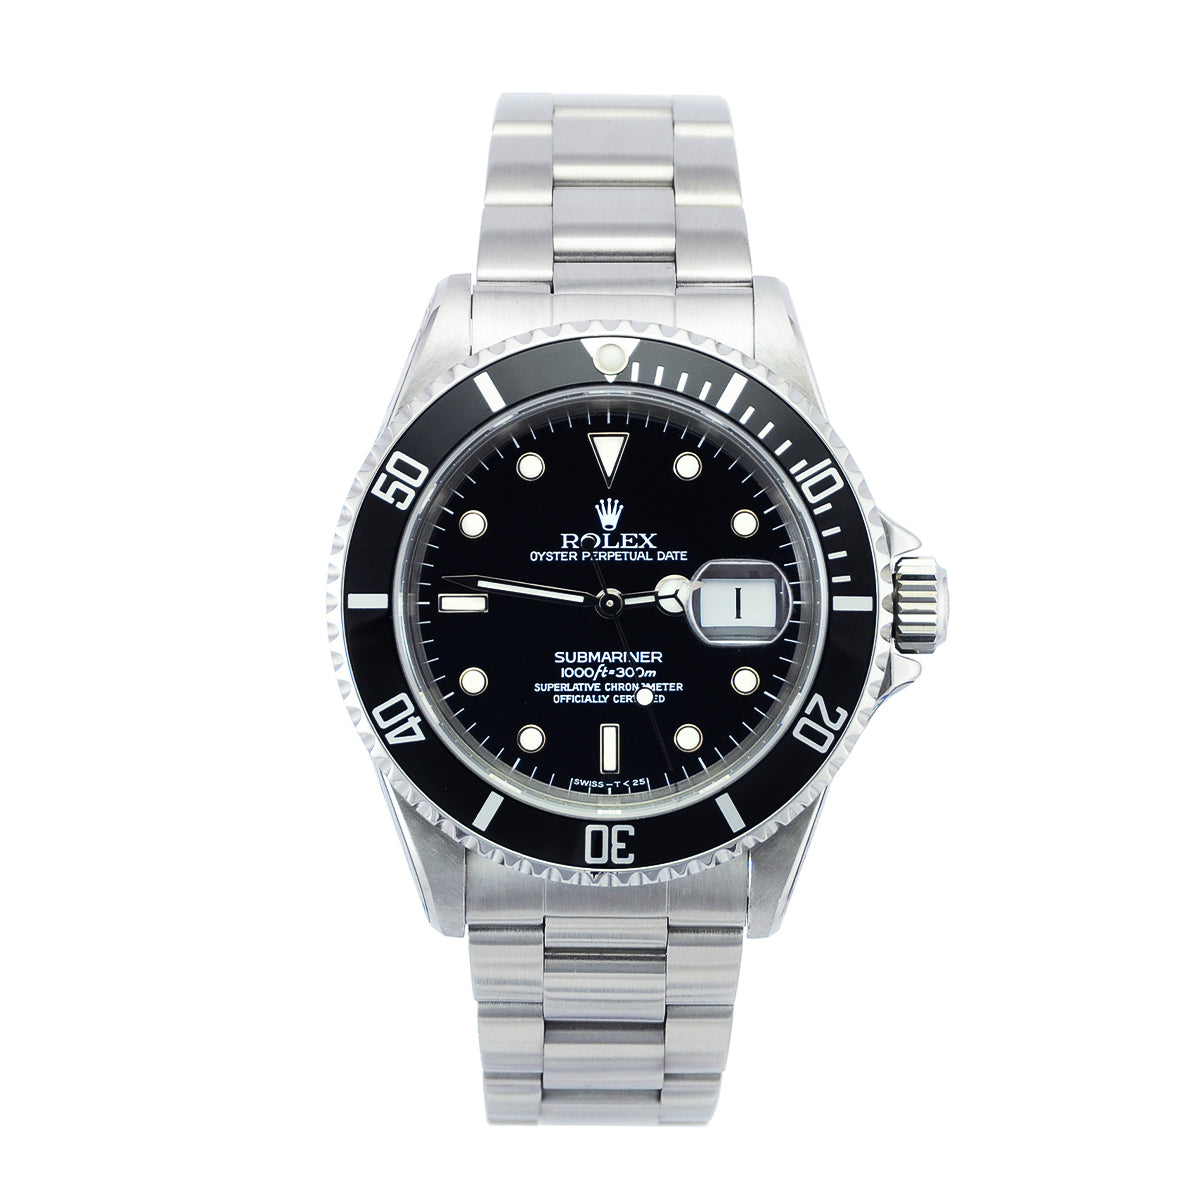 Rolex Submariner Date Swiss Only dial